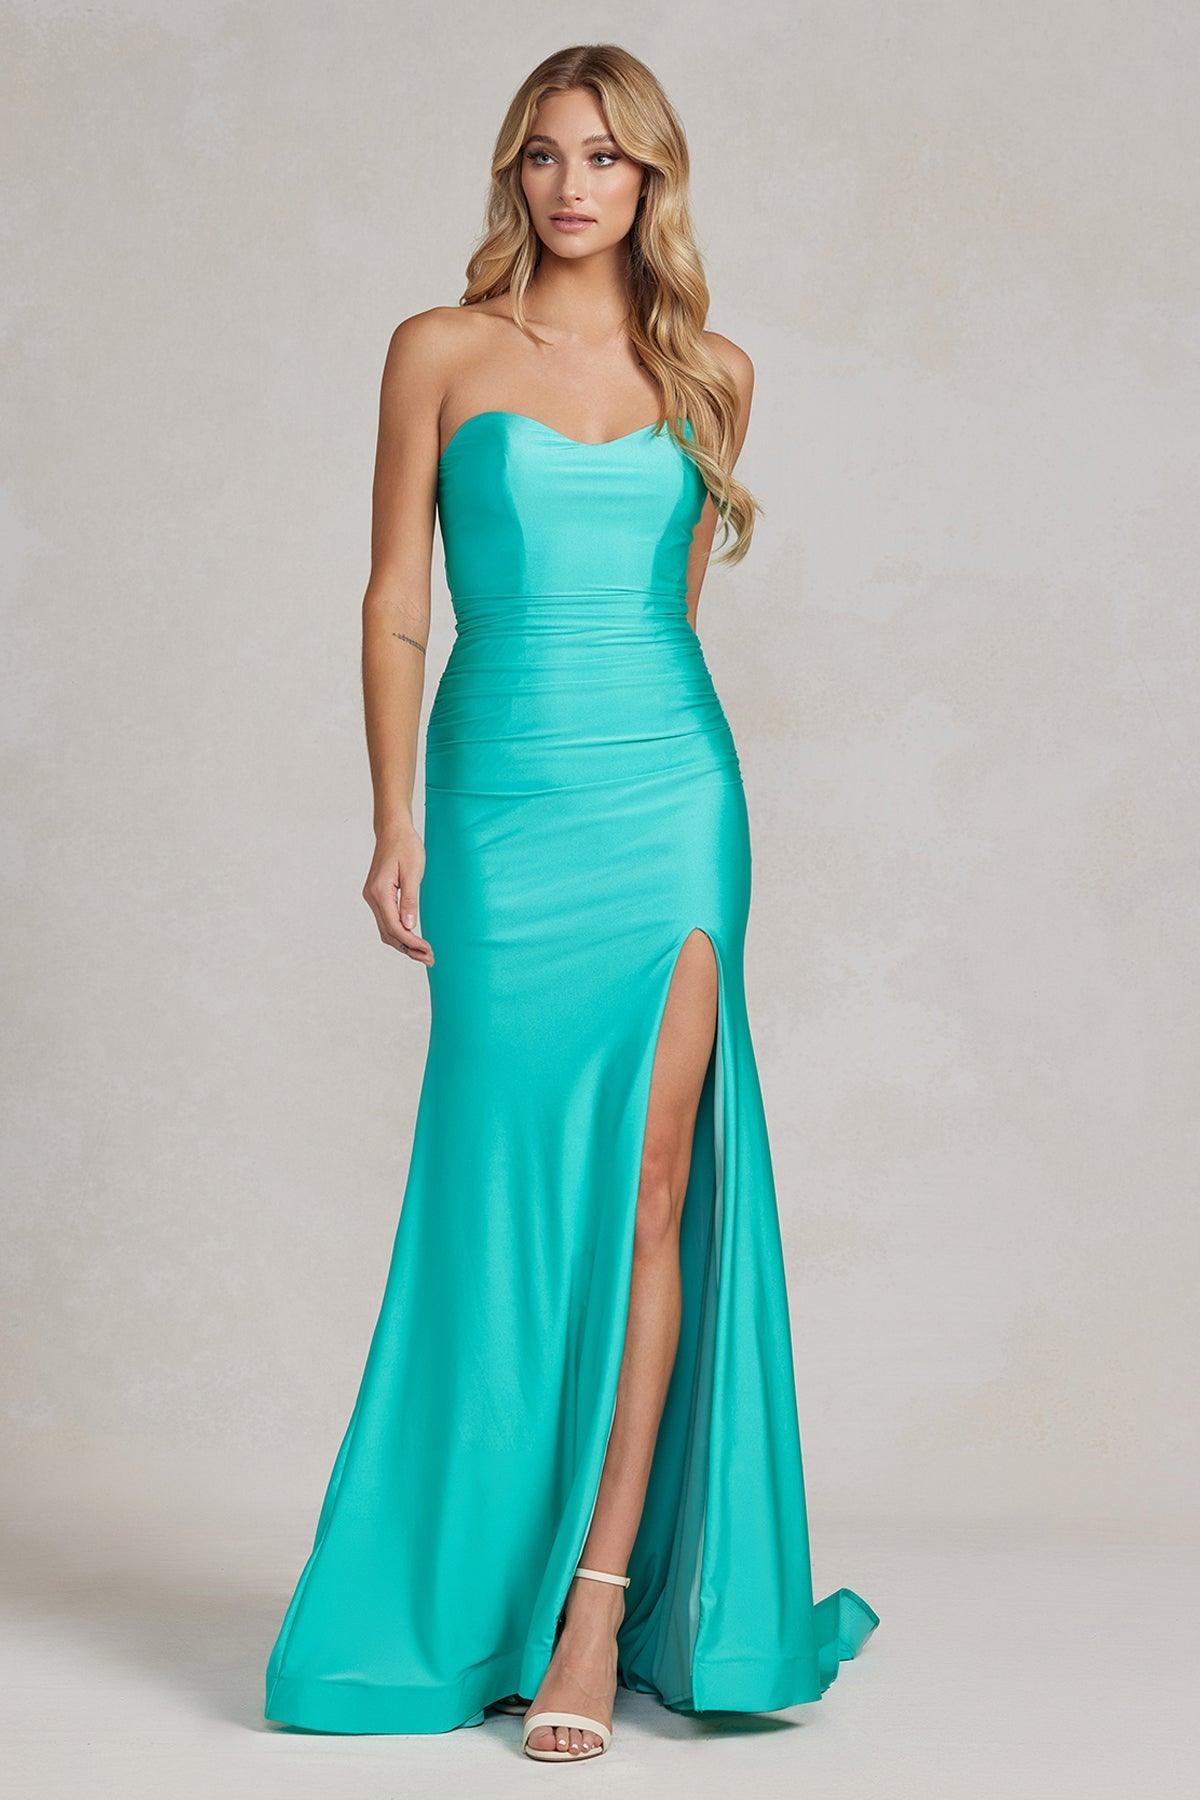 Nox Anabel T1139 Sexy Long Strapless Formal Prom Gown Atlantic Blue